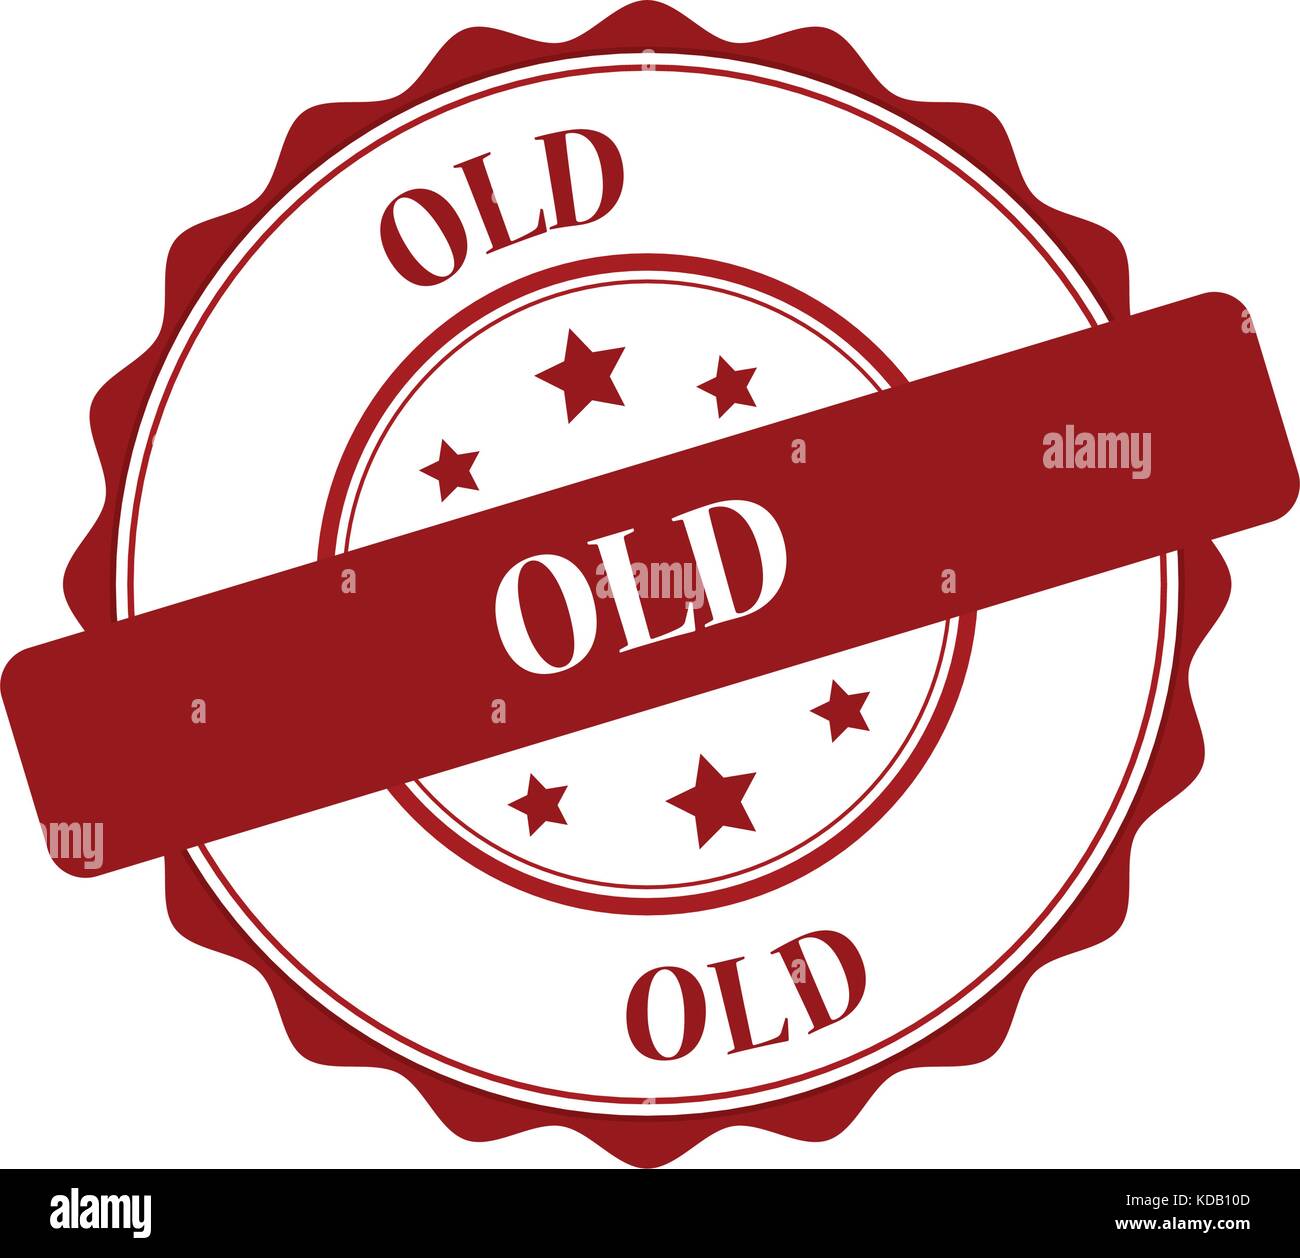 Old red stamp illustration Stock Vector